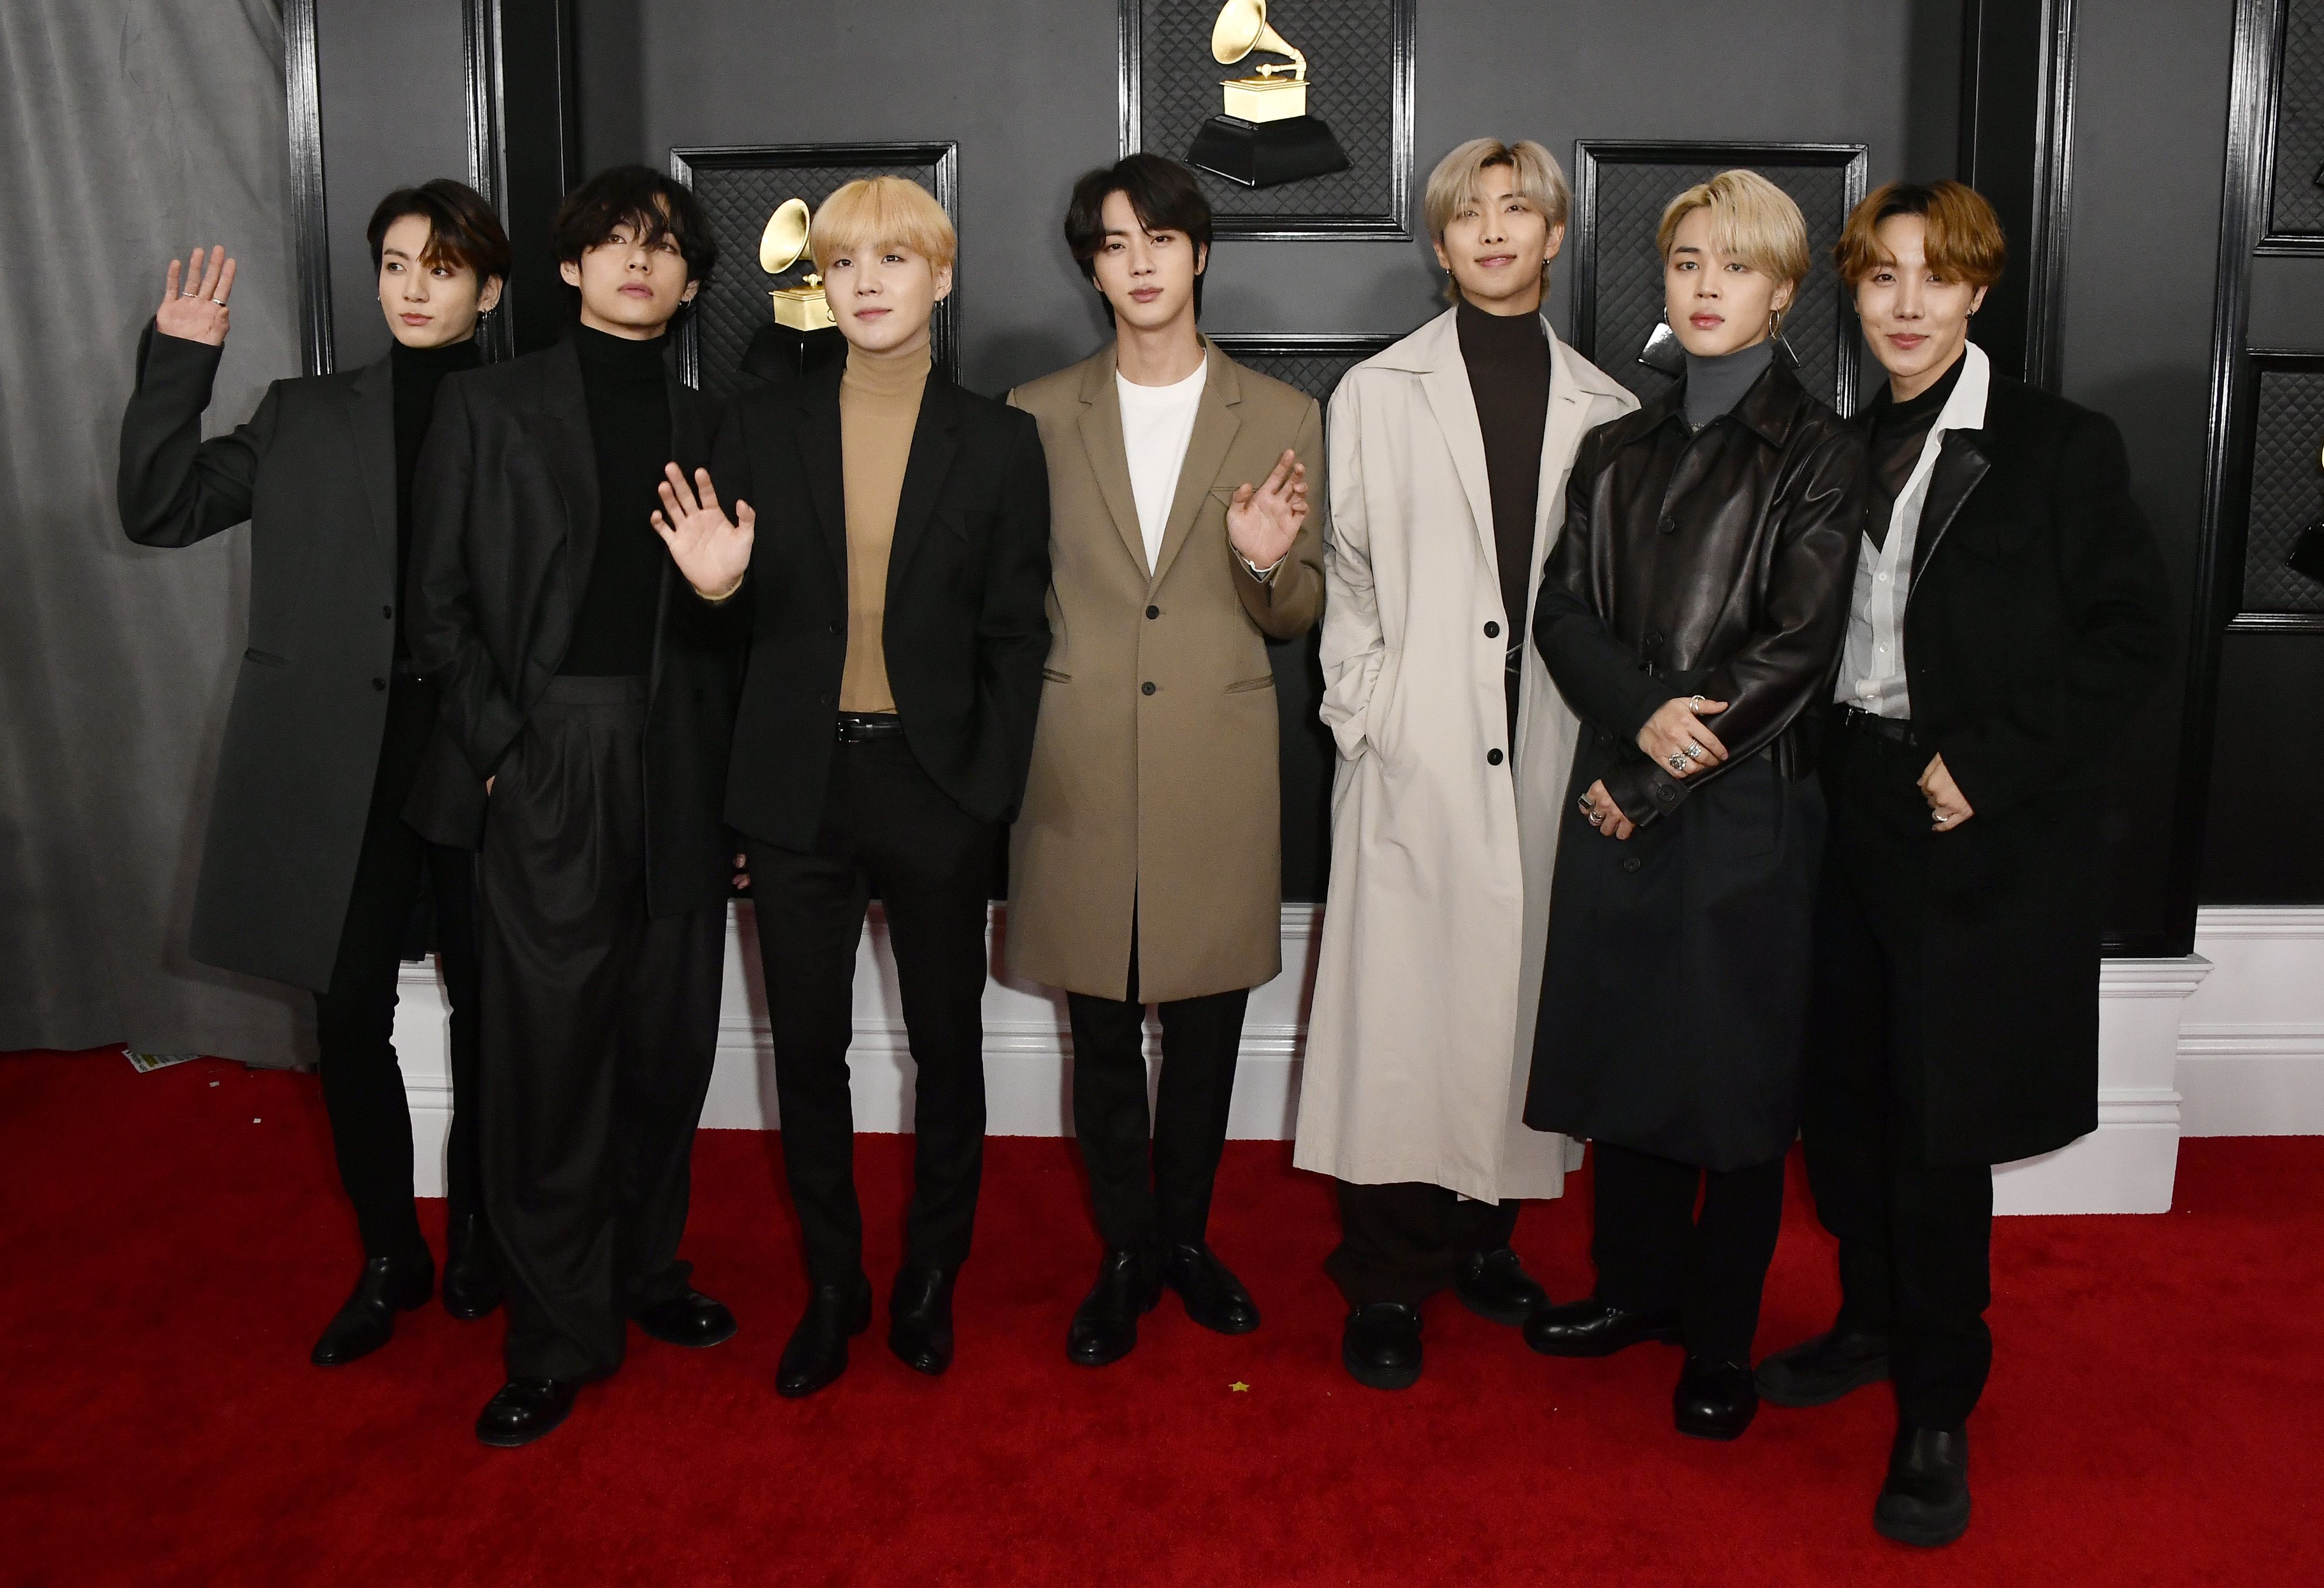 These Photo Of BTS At The 2020 Grammys Are Pure Perfection